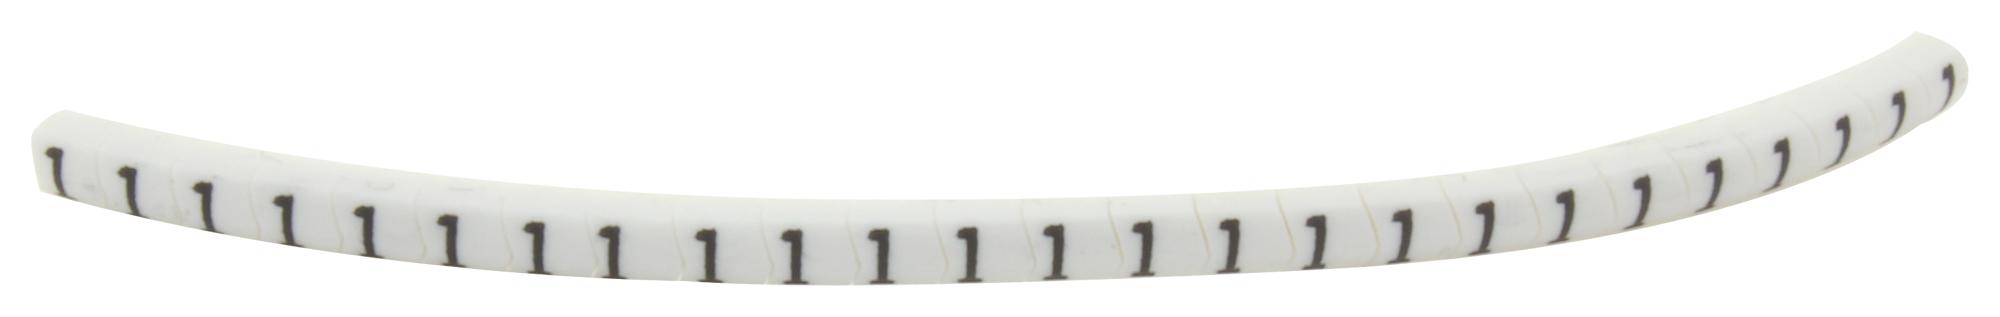 901-11066 CABLE MARKER, PRE PRINTED, PVC, WHITE HELLERMANNTYTON